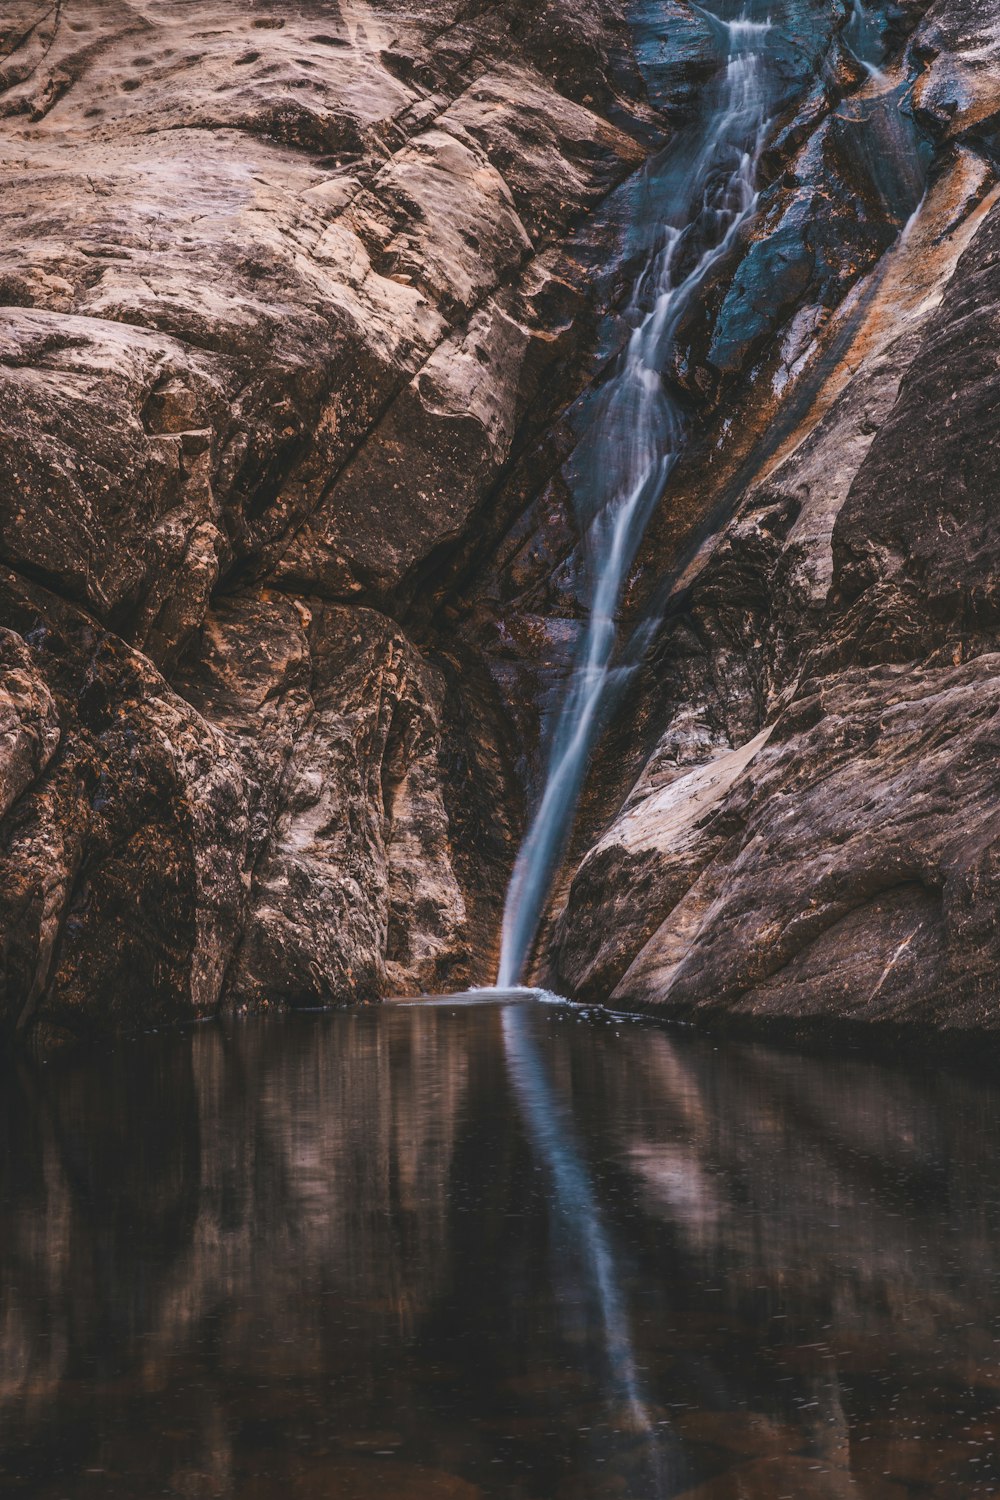 a small waterfall in the middle of some rocks